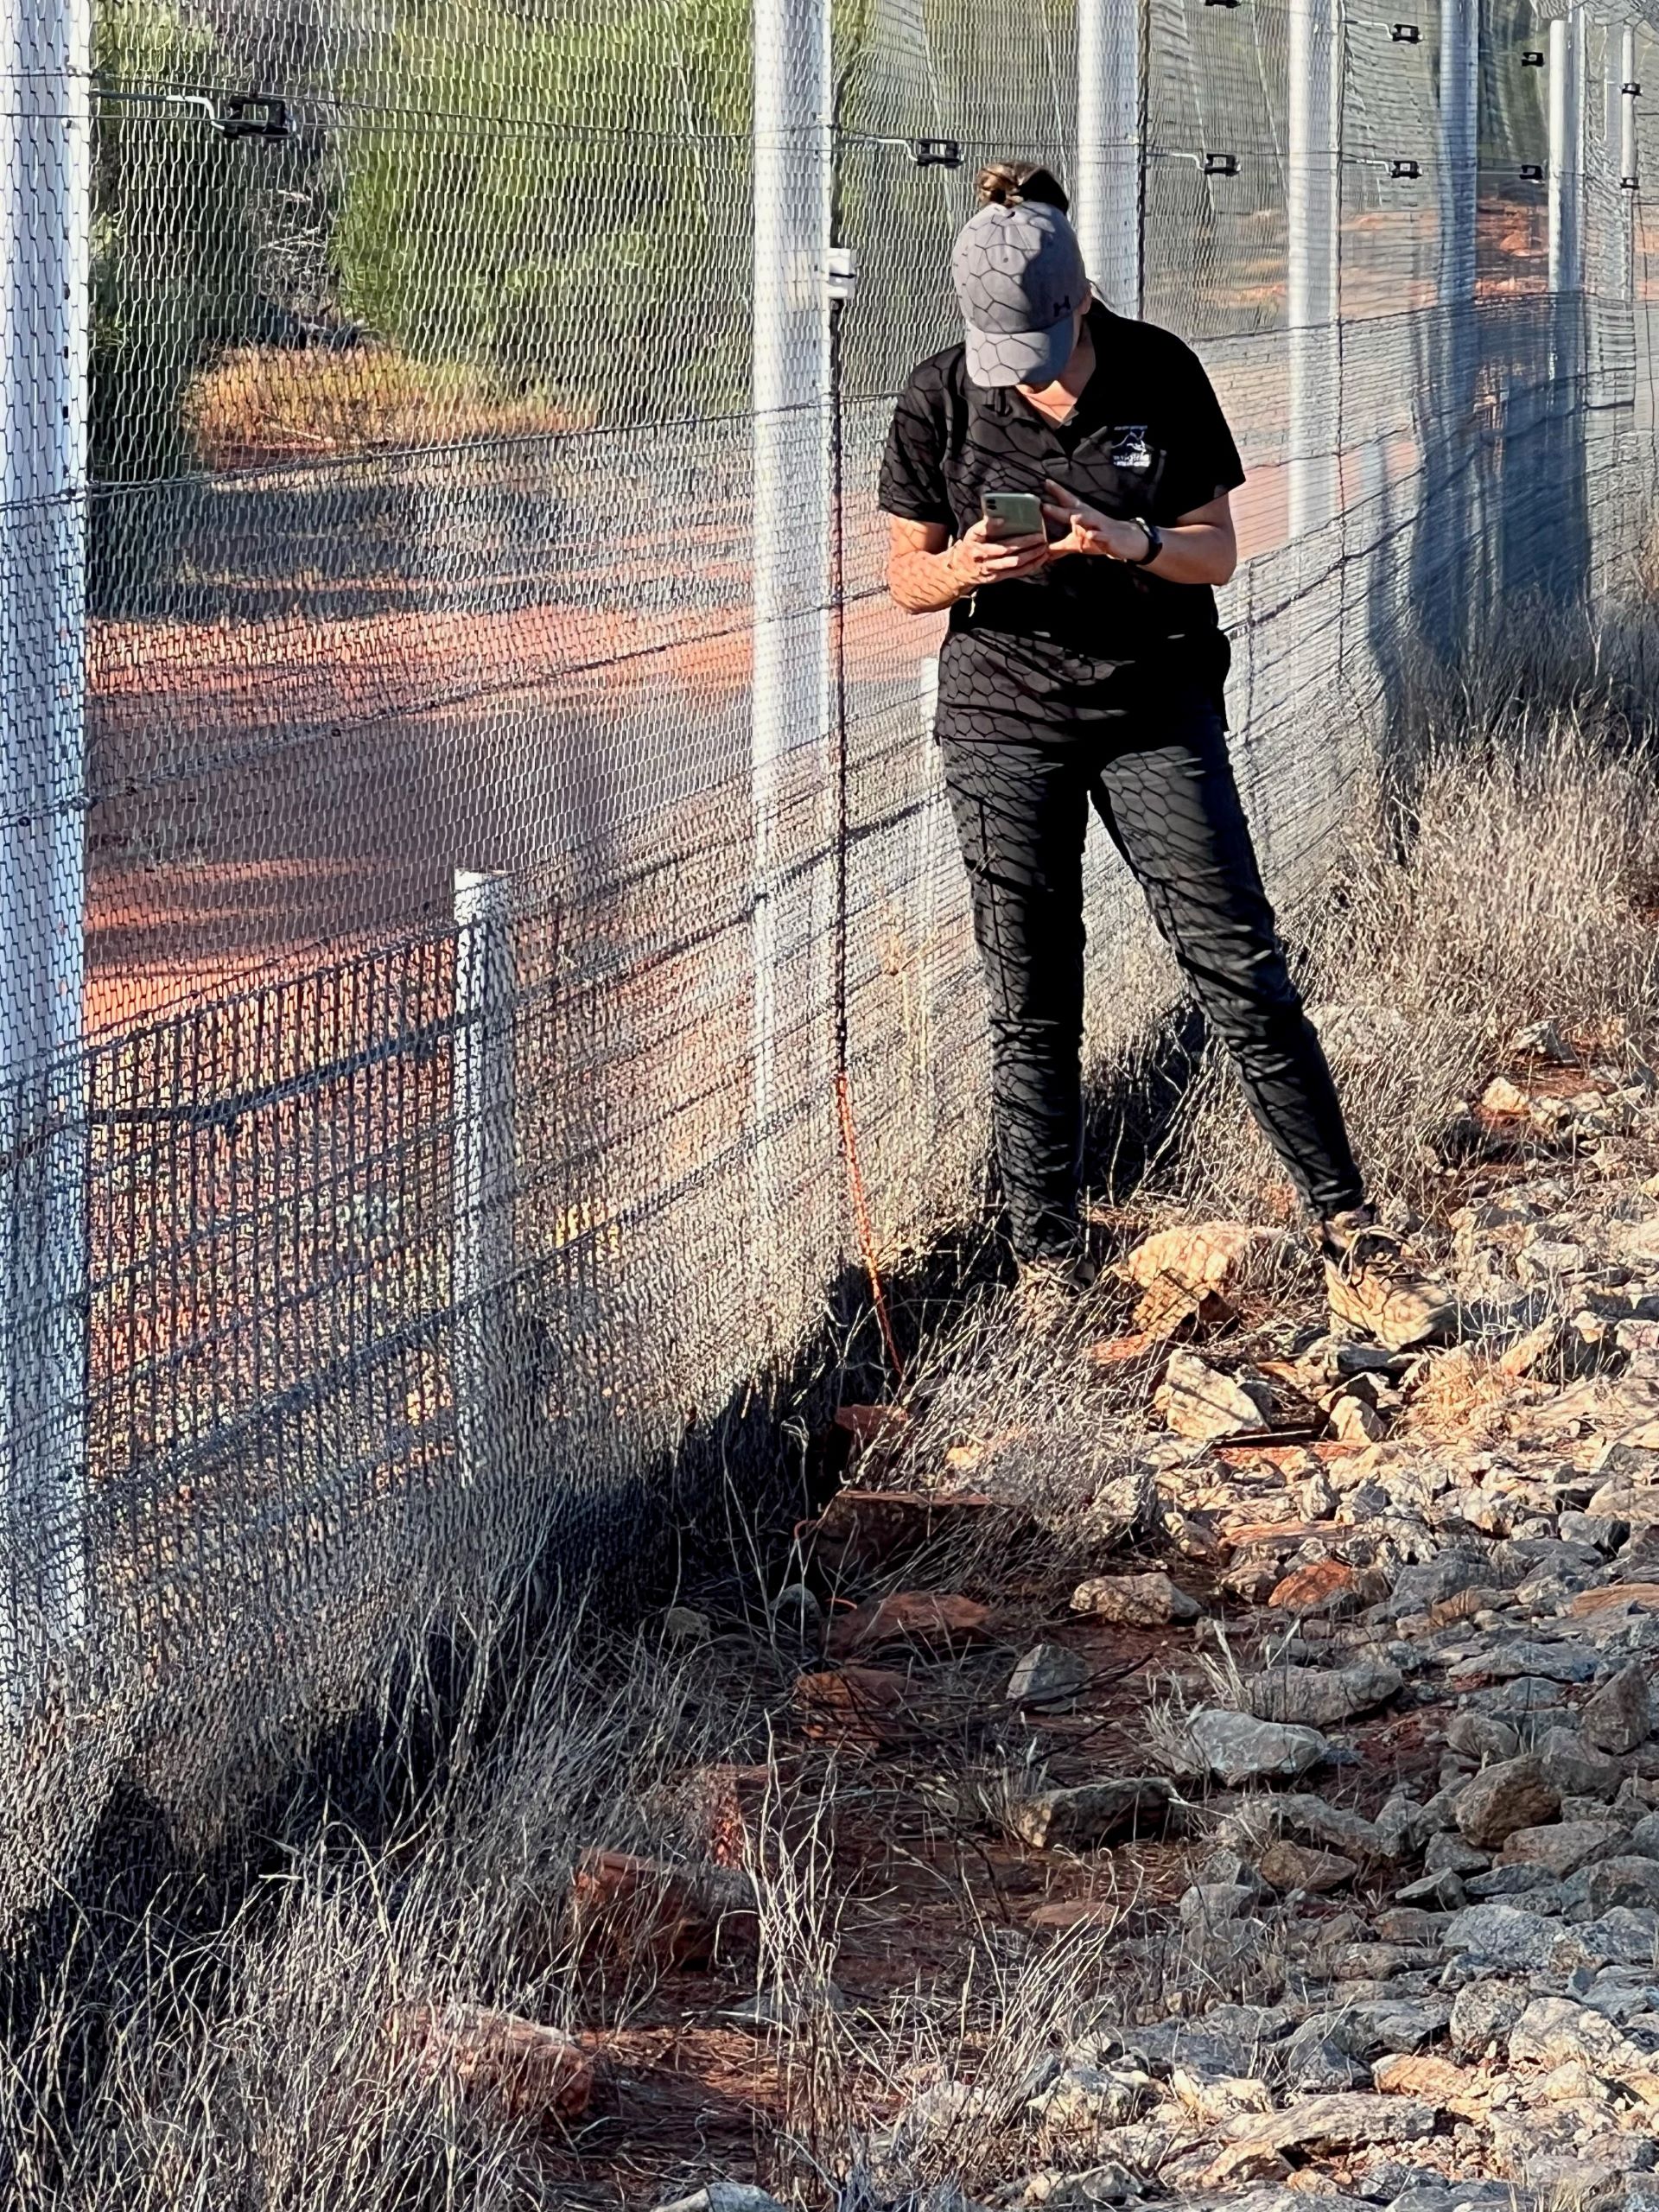 A young woman stands in front of a grey fence looking at a handheld device